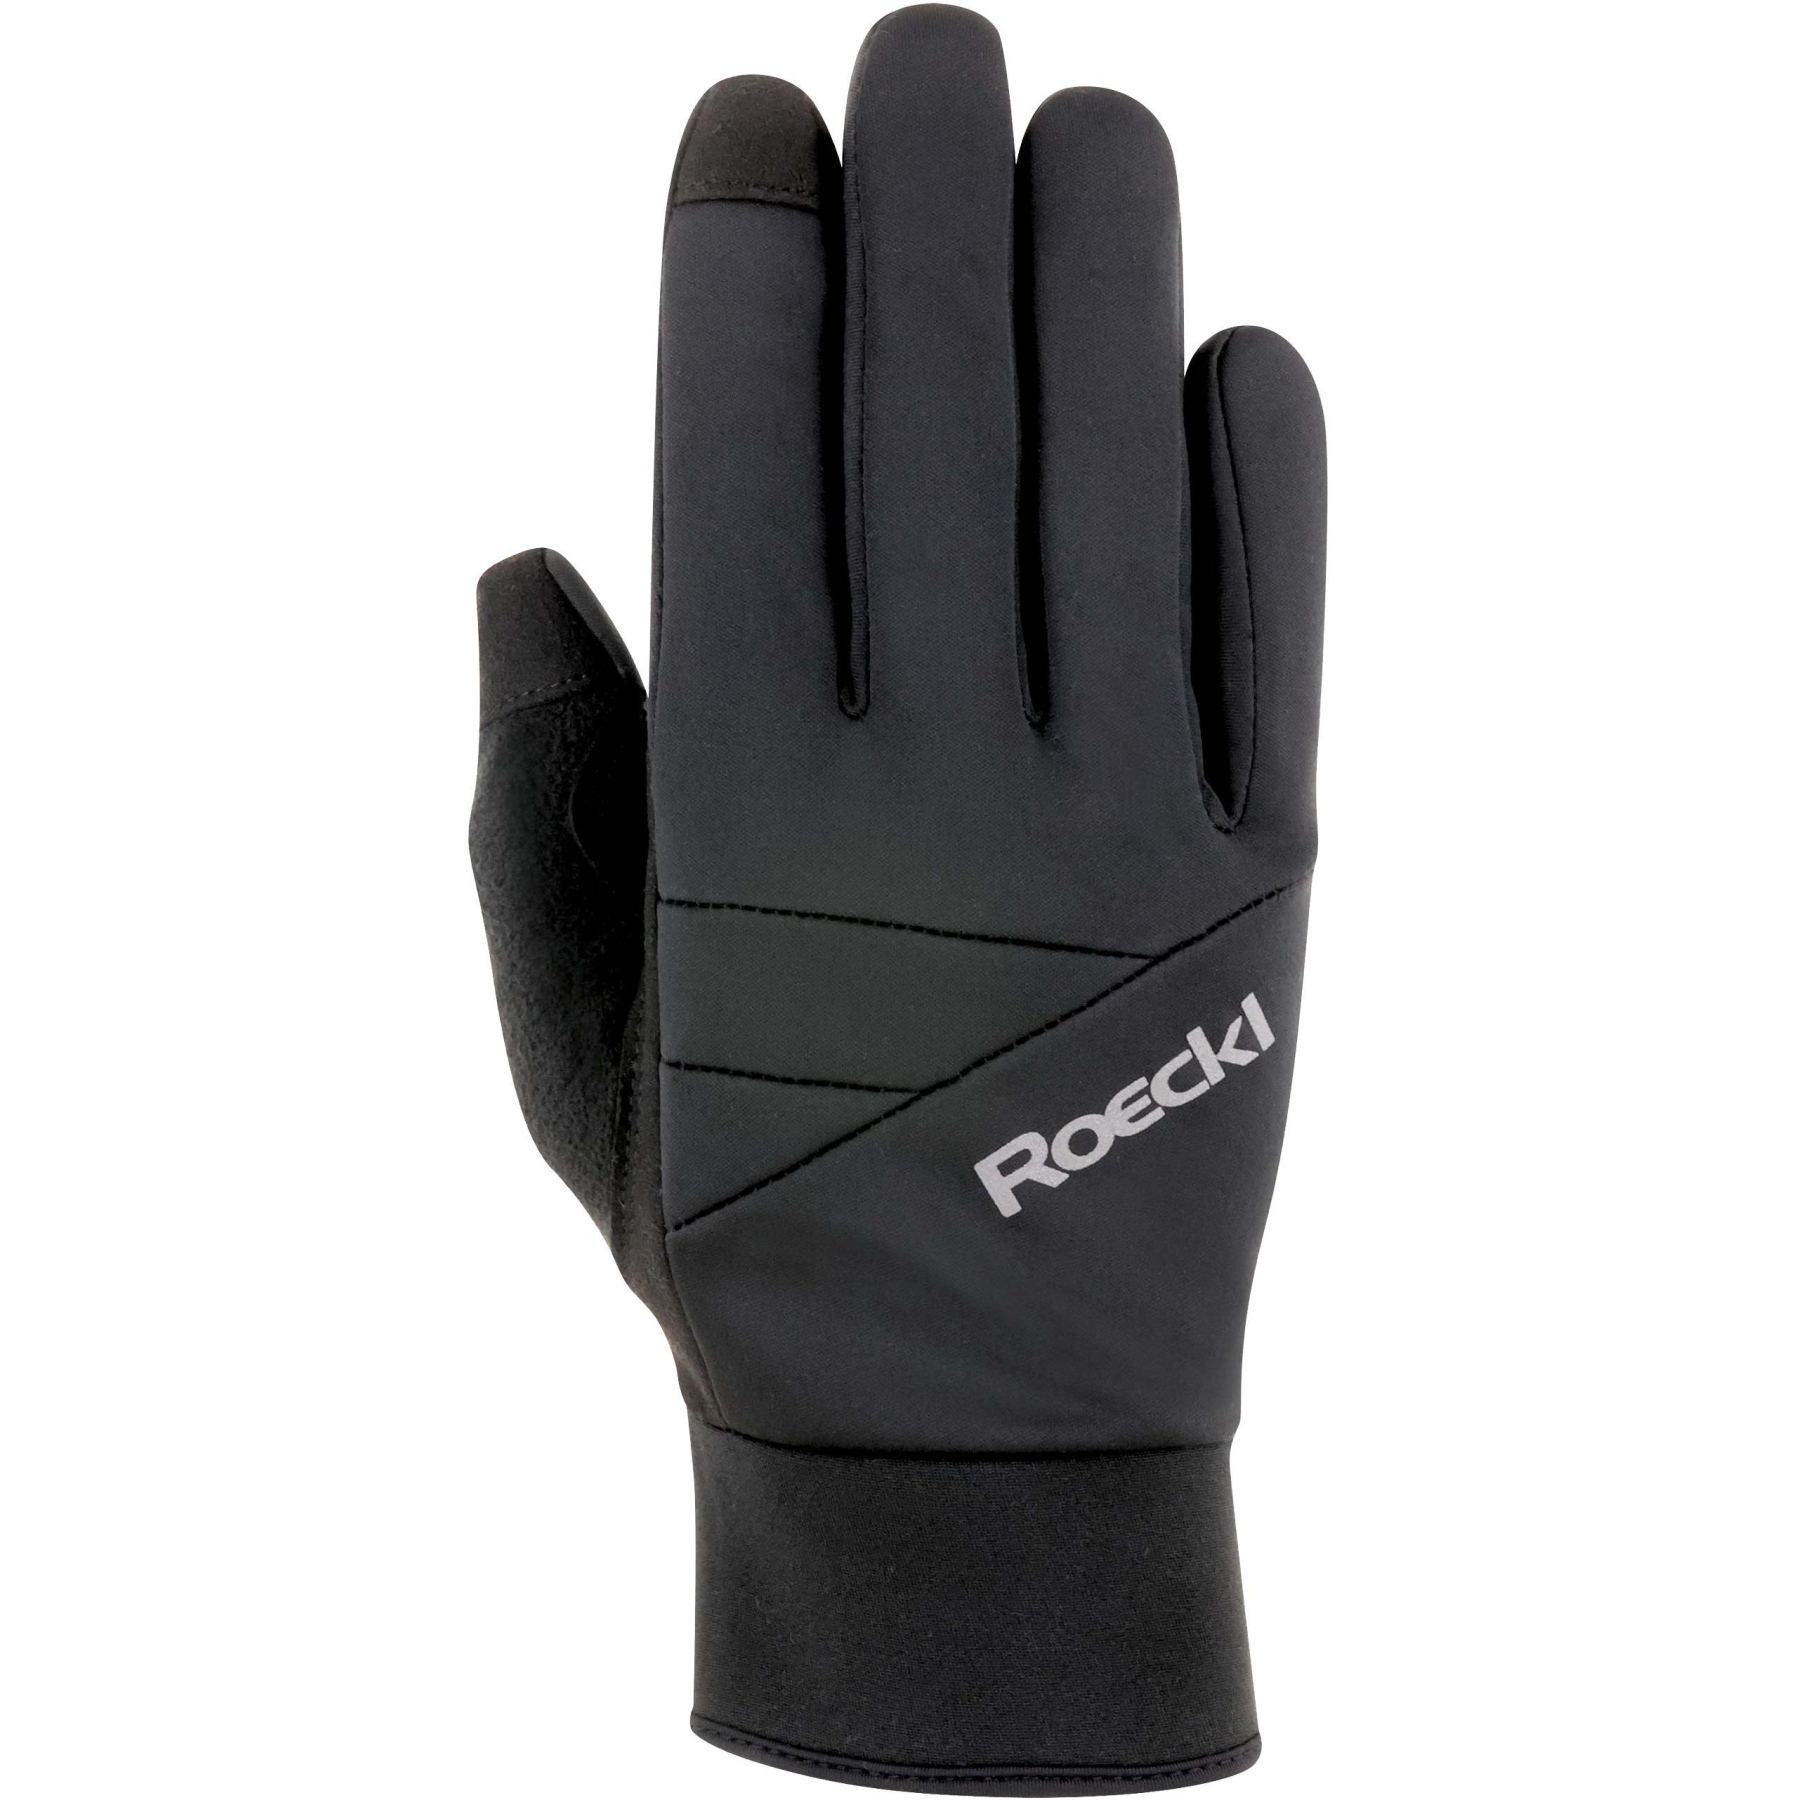 Image of Roeckl Sports Reichenthal Juniors Cycling Gloves - black 9000